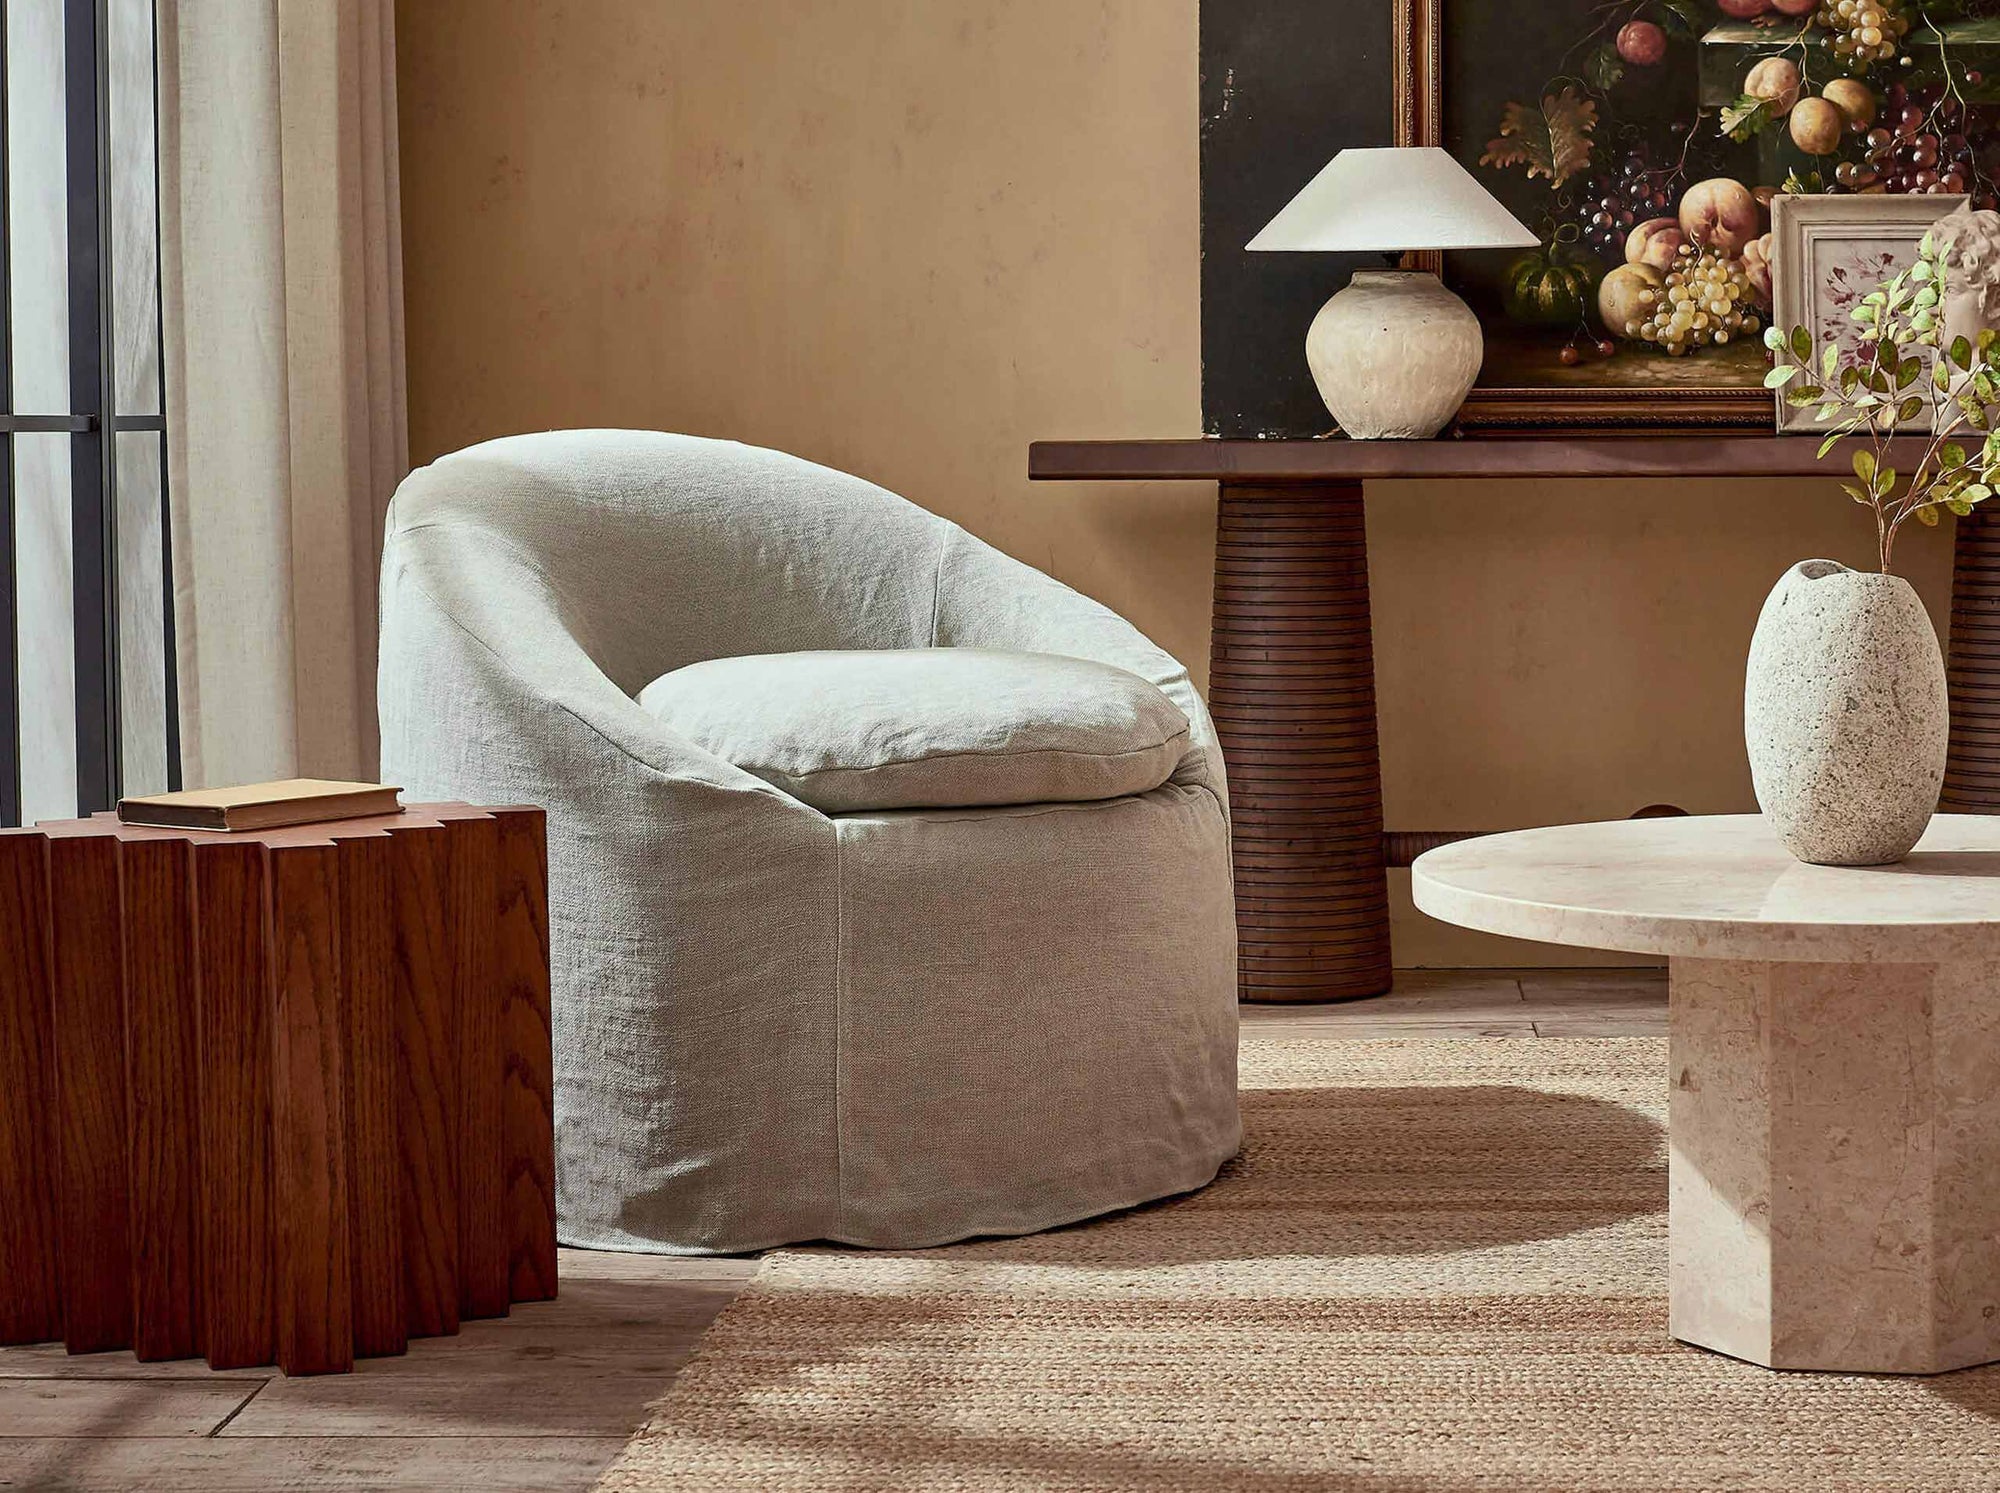 Ozzi Chair in Jasmine Rice, a light warm greige Medium Weight Linen, placed in a decorated room with a wooden side table and round stone coffee table